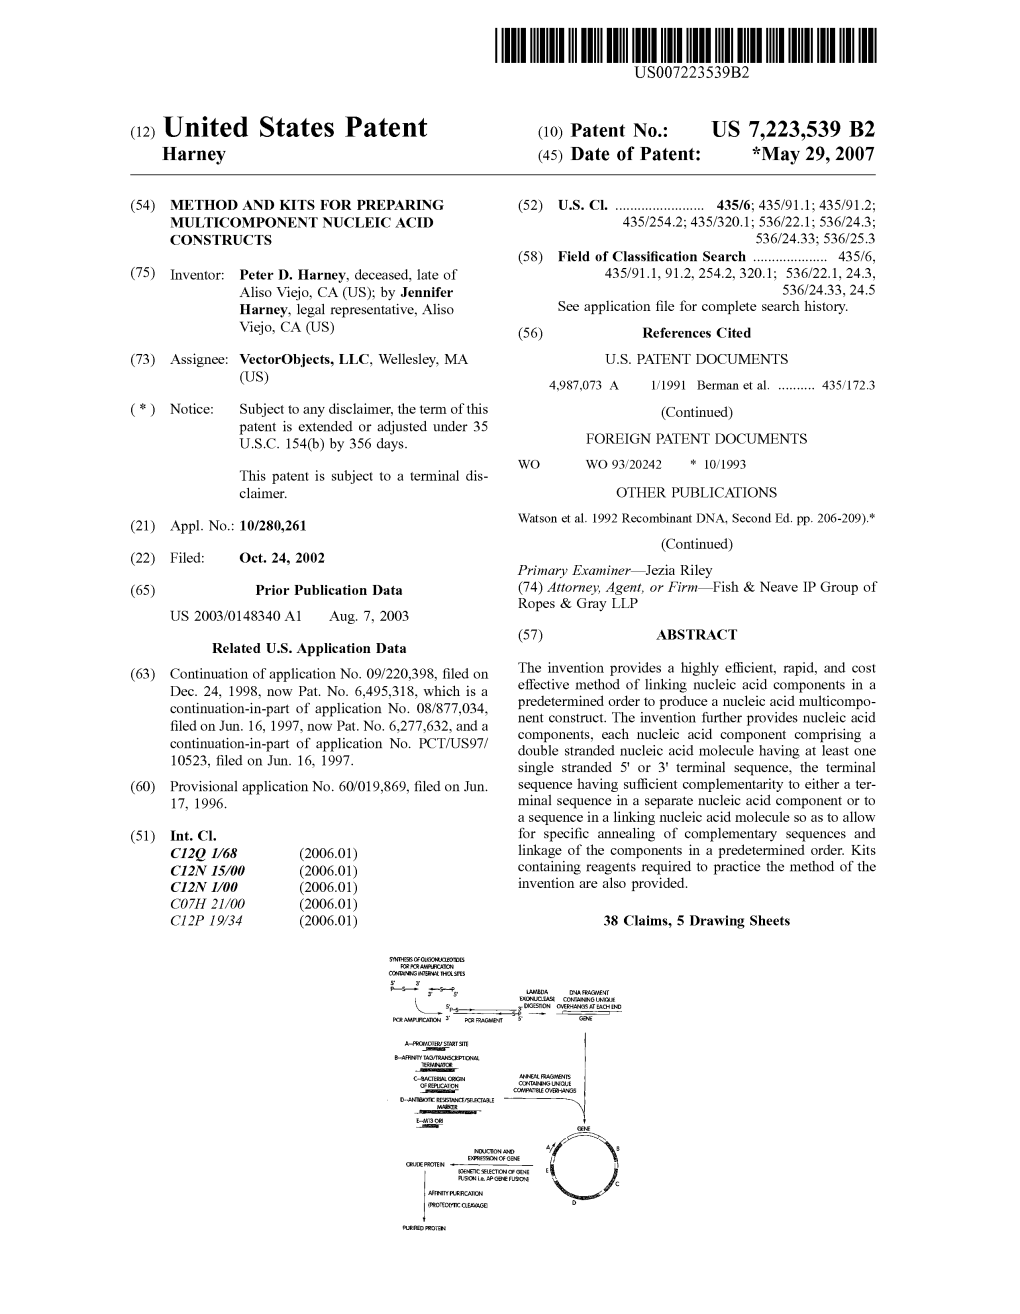 (12) United States Patent (10) Patent No.: US 7,223,539 B2 Harney (45) Date of Patent: *May 29, 2007